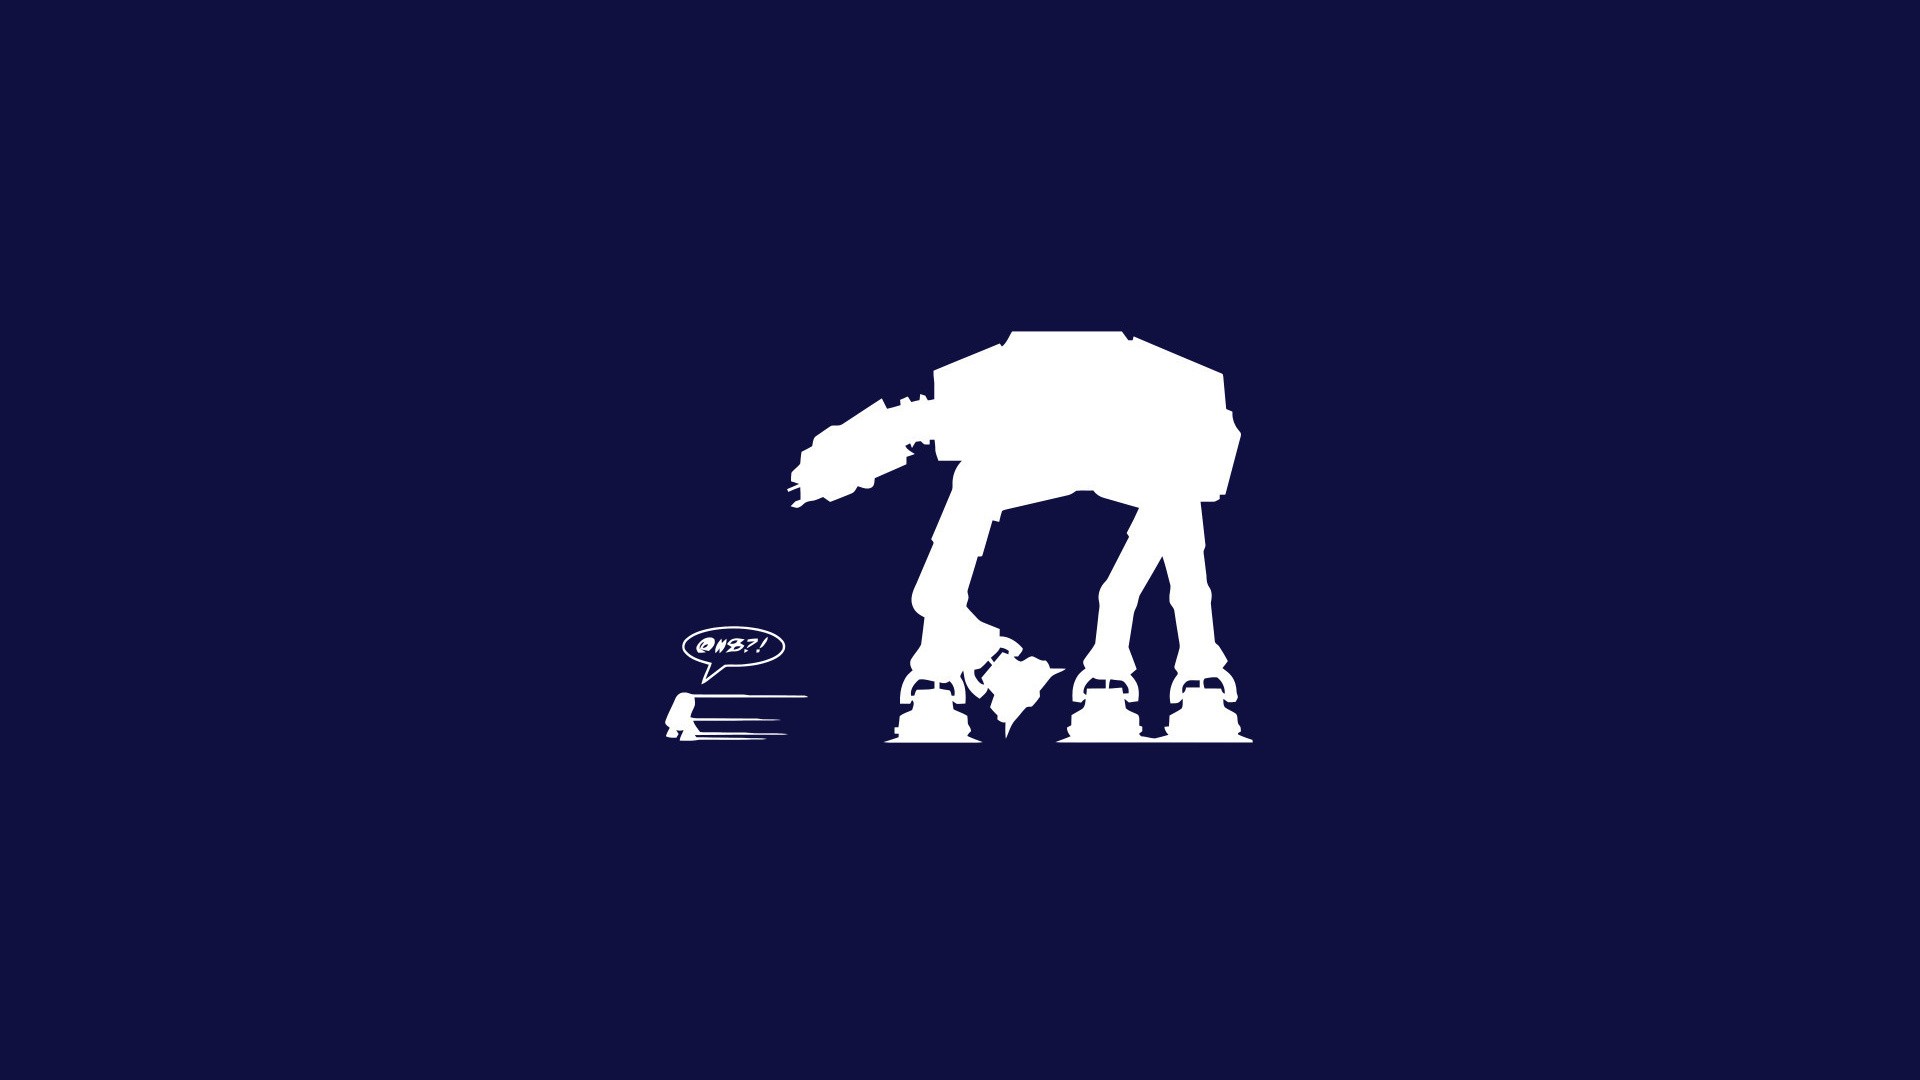 General 1920x1080 Star Wars humor minimalism R2-D2 AT-AT simple background blue background vehicle Star Wars Droids